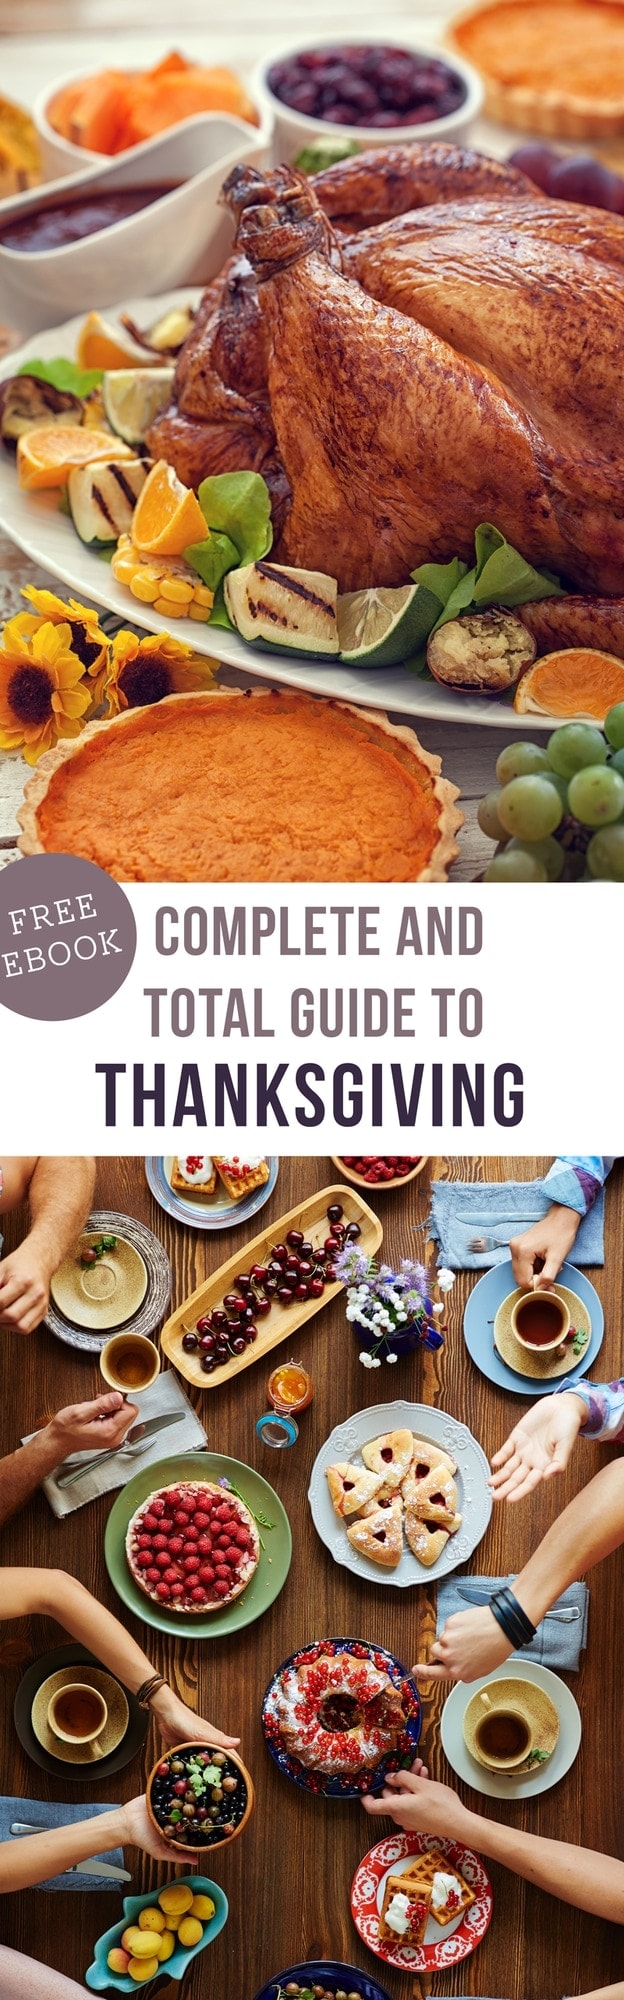 The Complete and Total Guide to Thanksgiving (Free eBook!)